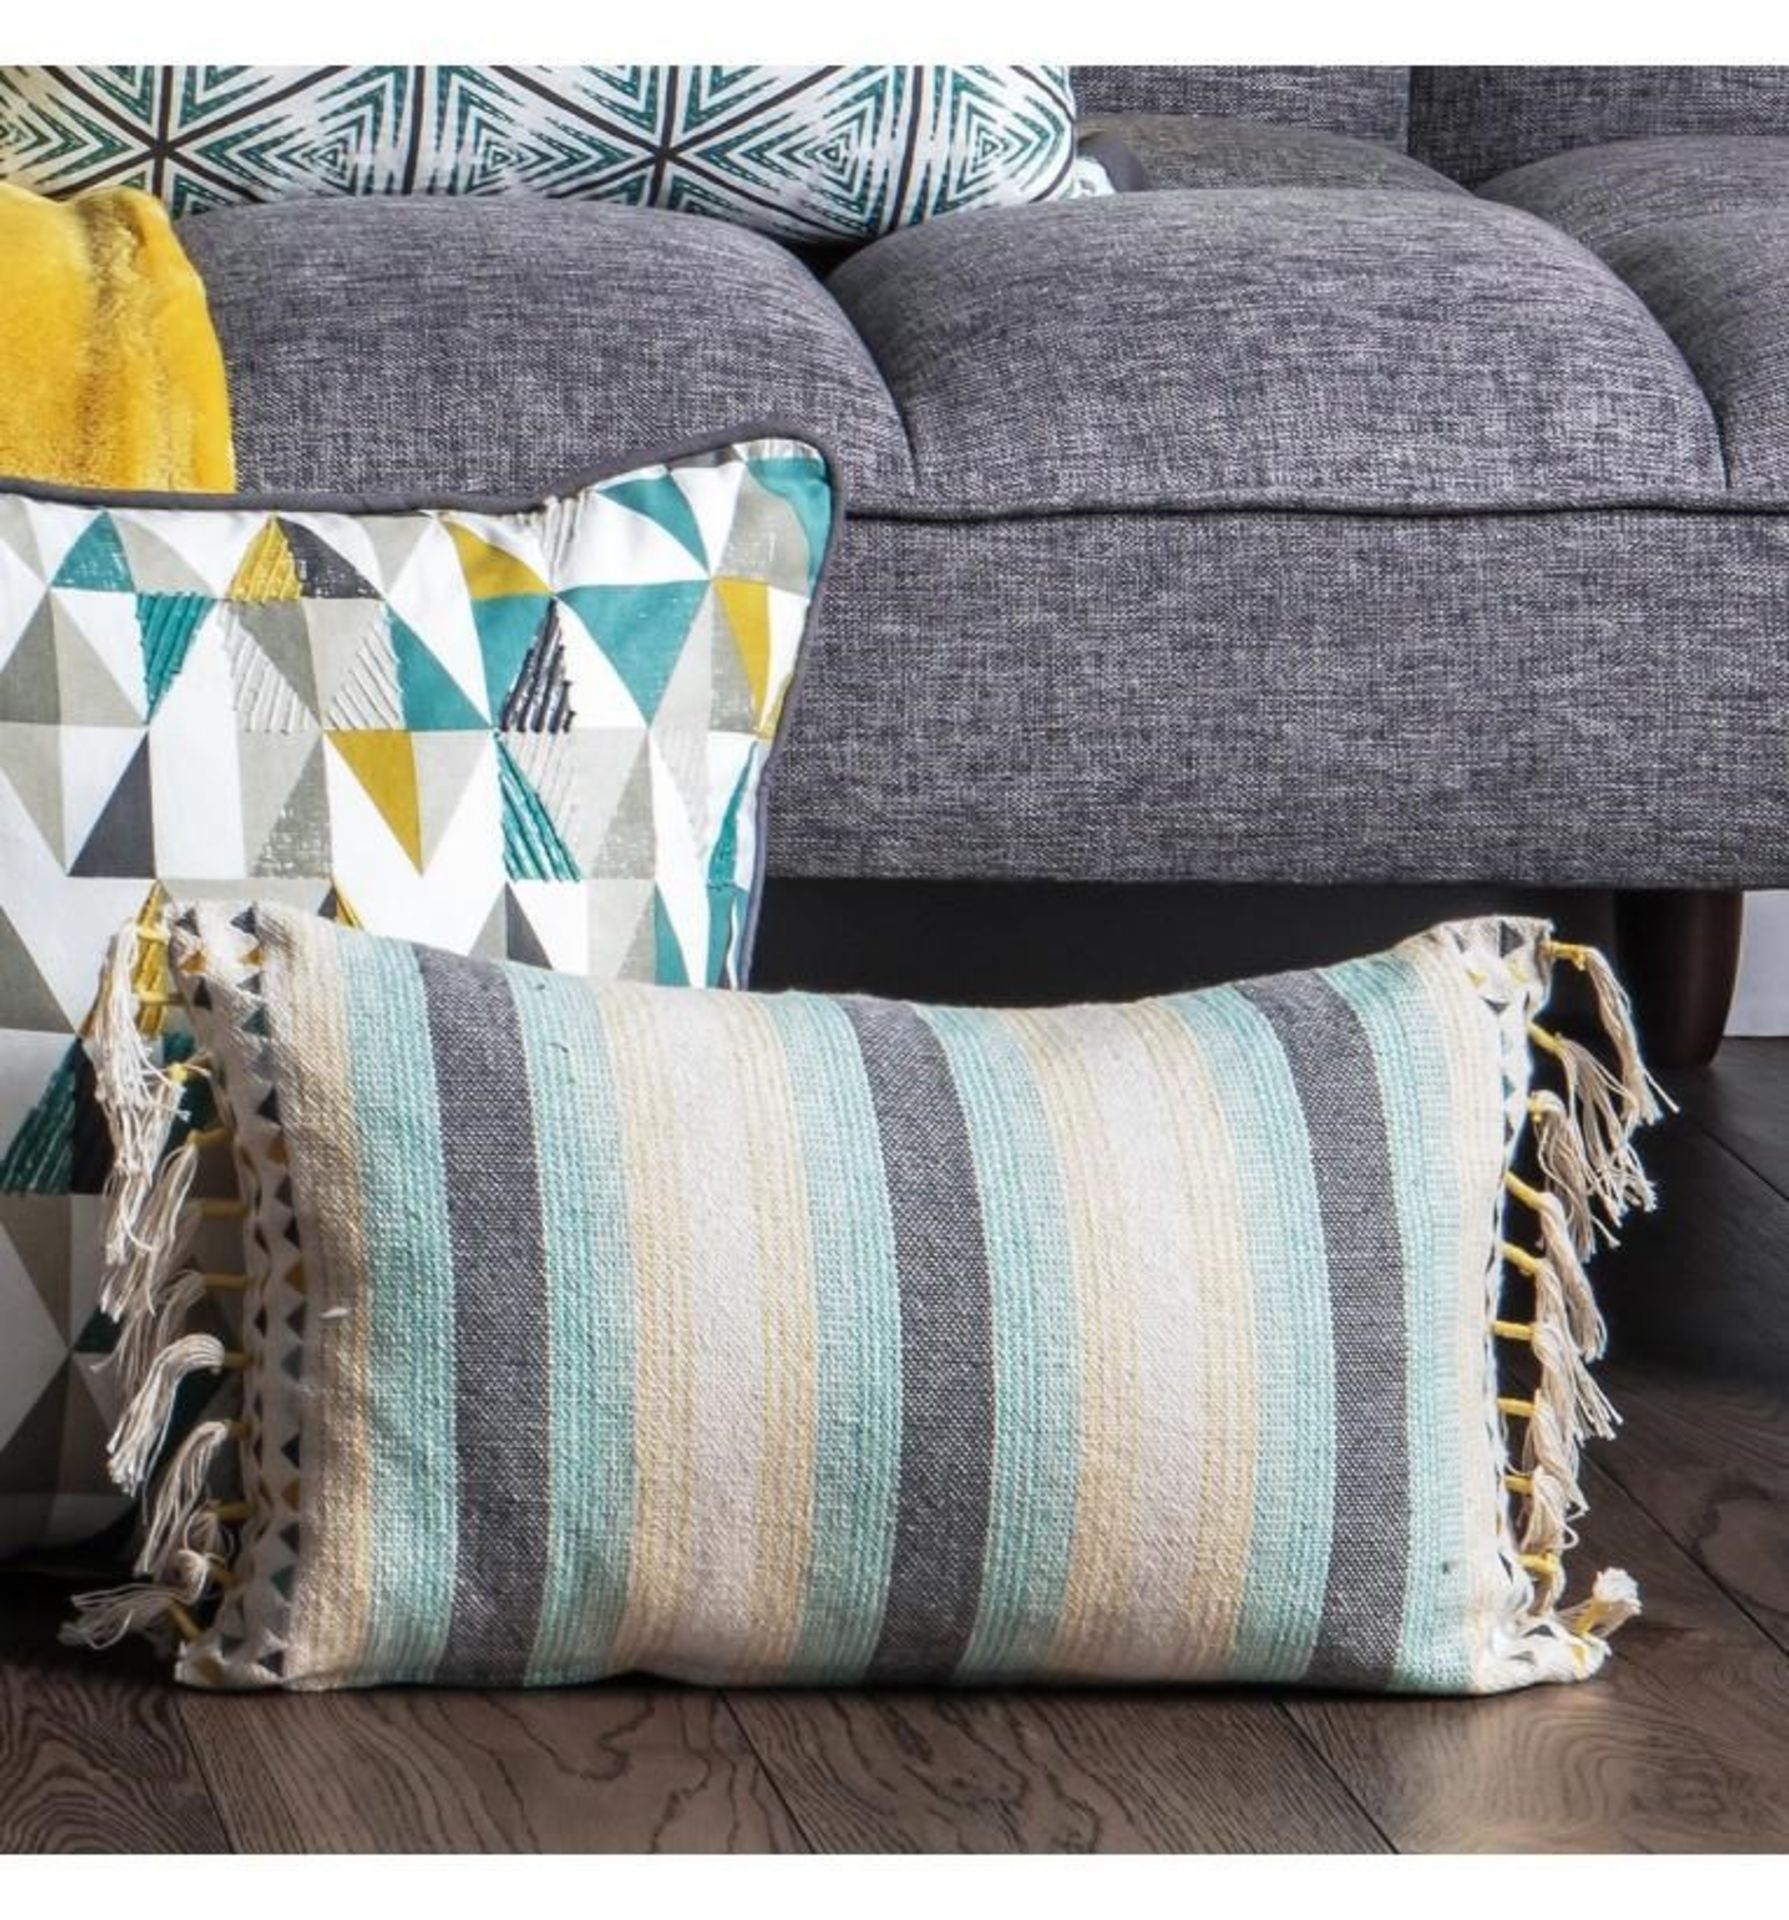 5 x Gala Cushion Teal And Ochre Cotton Feather Filled Cushion 30 x 50cm